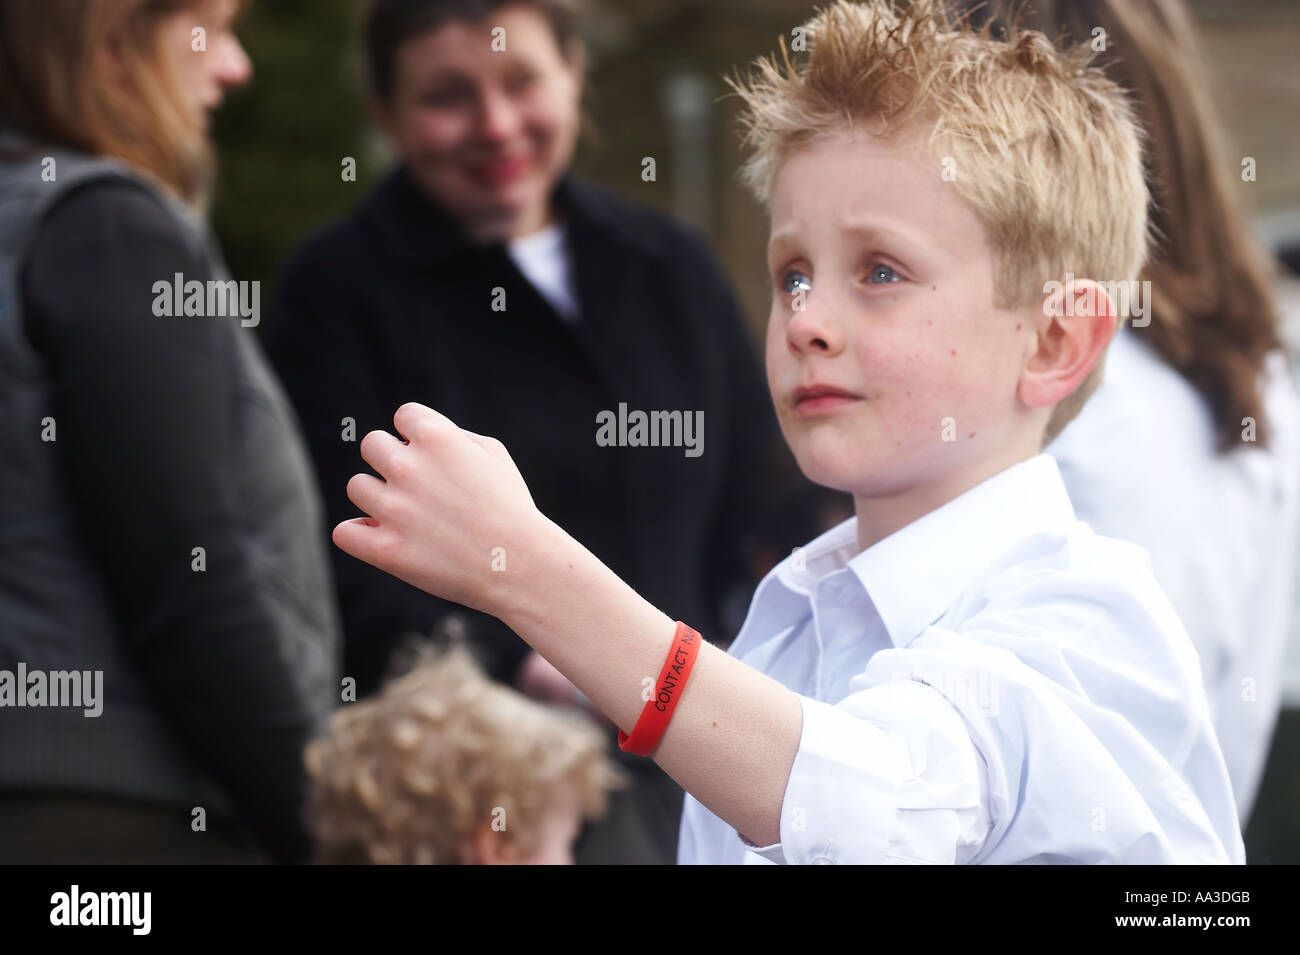 Small child lost in a crowd Stock Photo